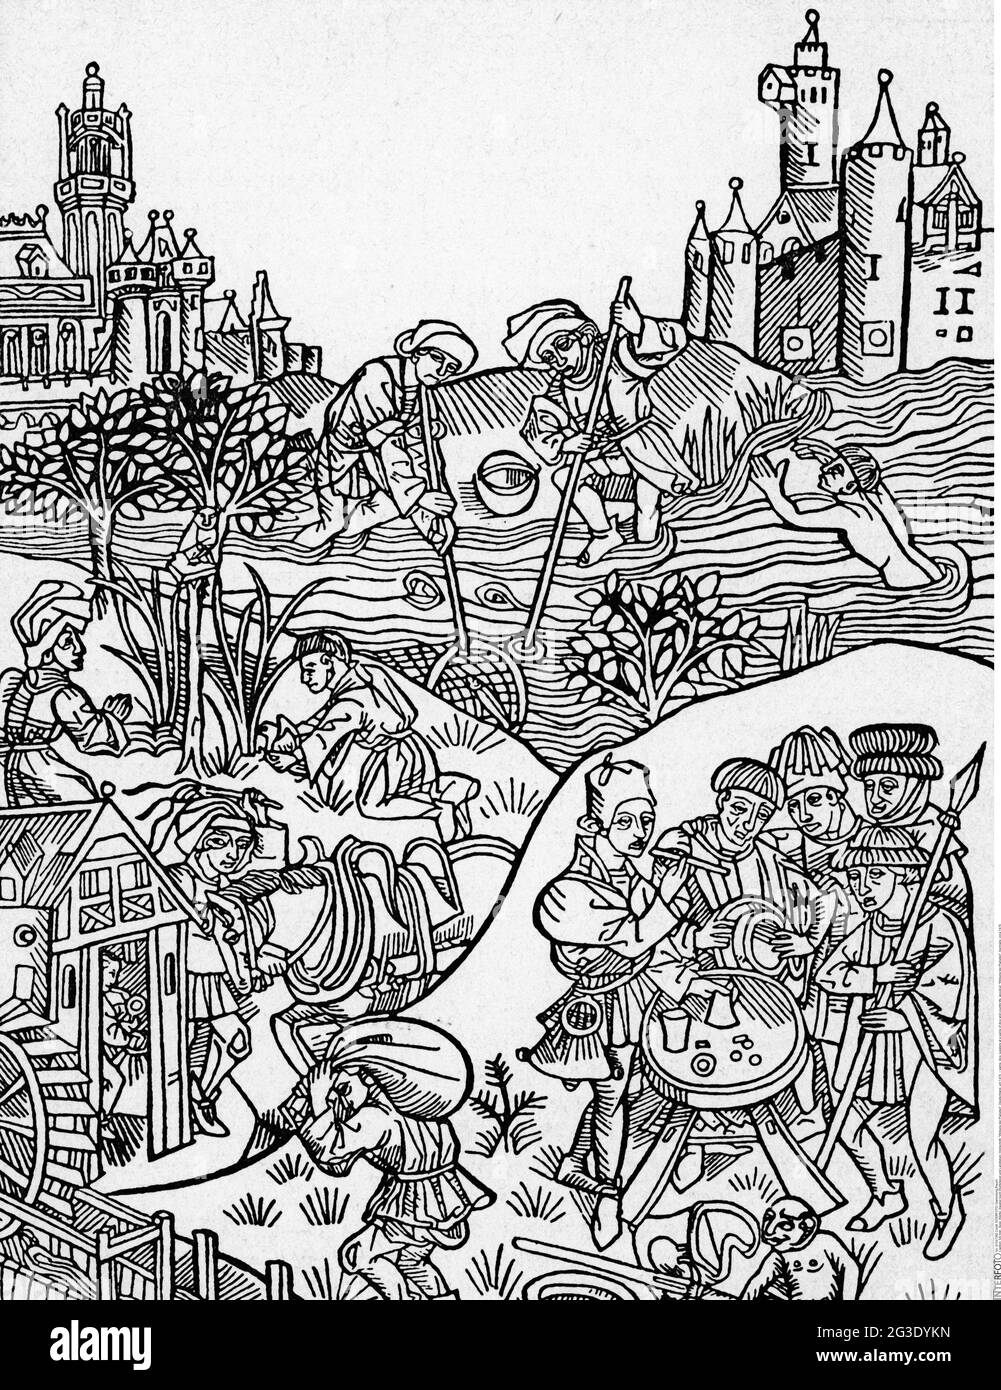 game, dice, jugglers at a game of dice and country life, woodcut, 'Wirkung der Planeten', Germany, ARTIST'S COPYRIGHT HAS NOT TO BE CLEARED Stock Photo